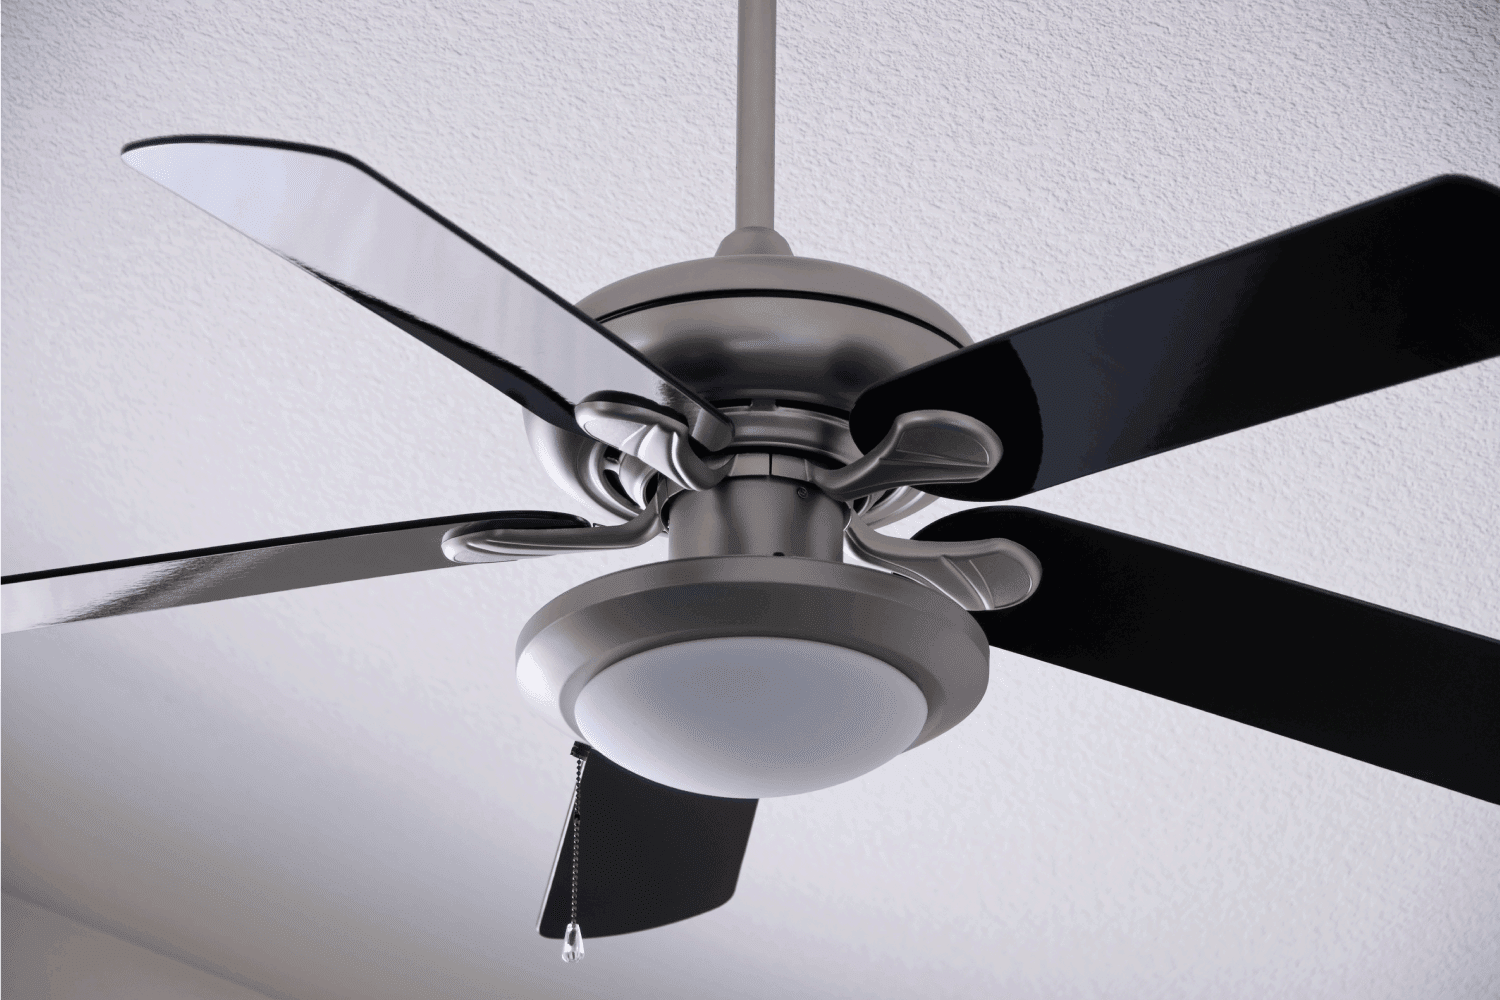 A brushed metal ceiling fan with black fins.